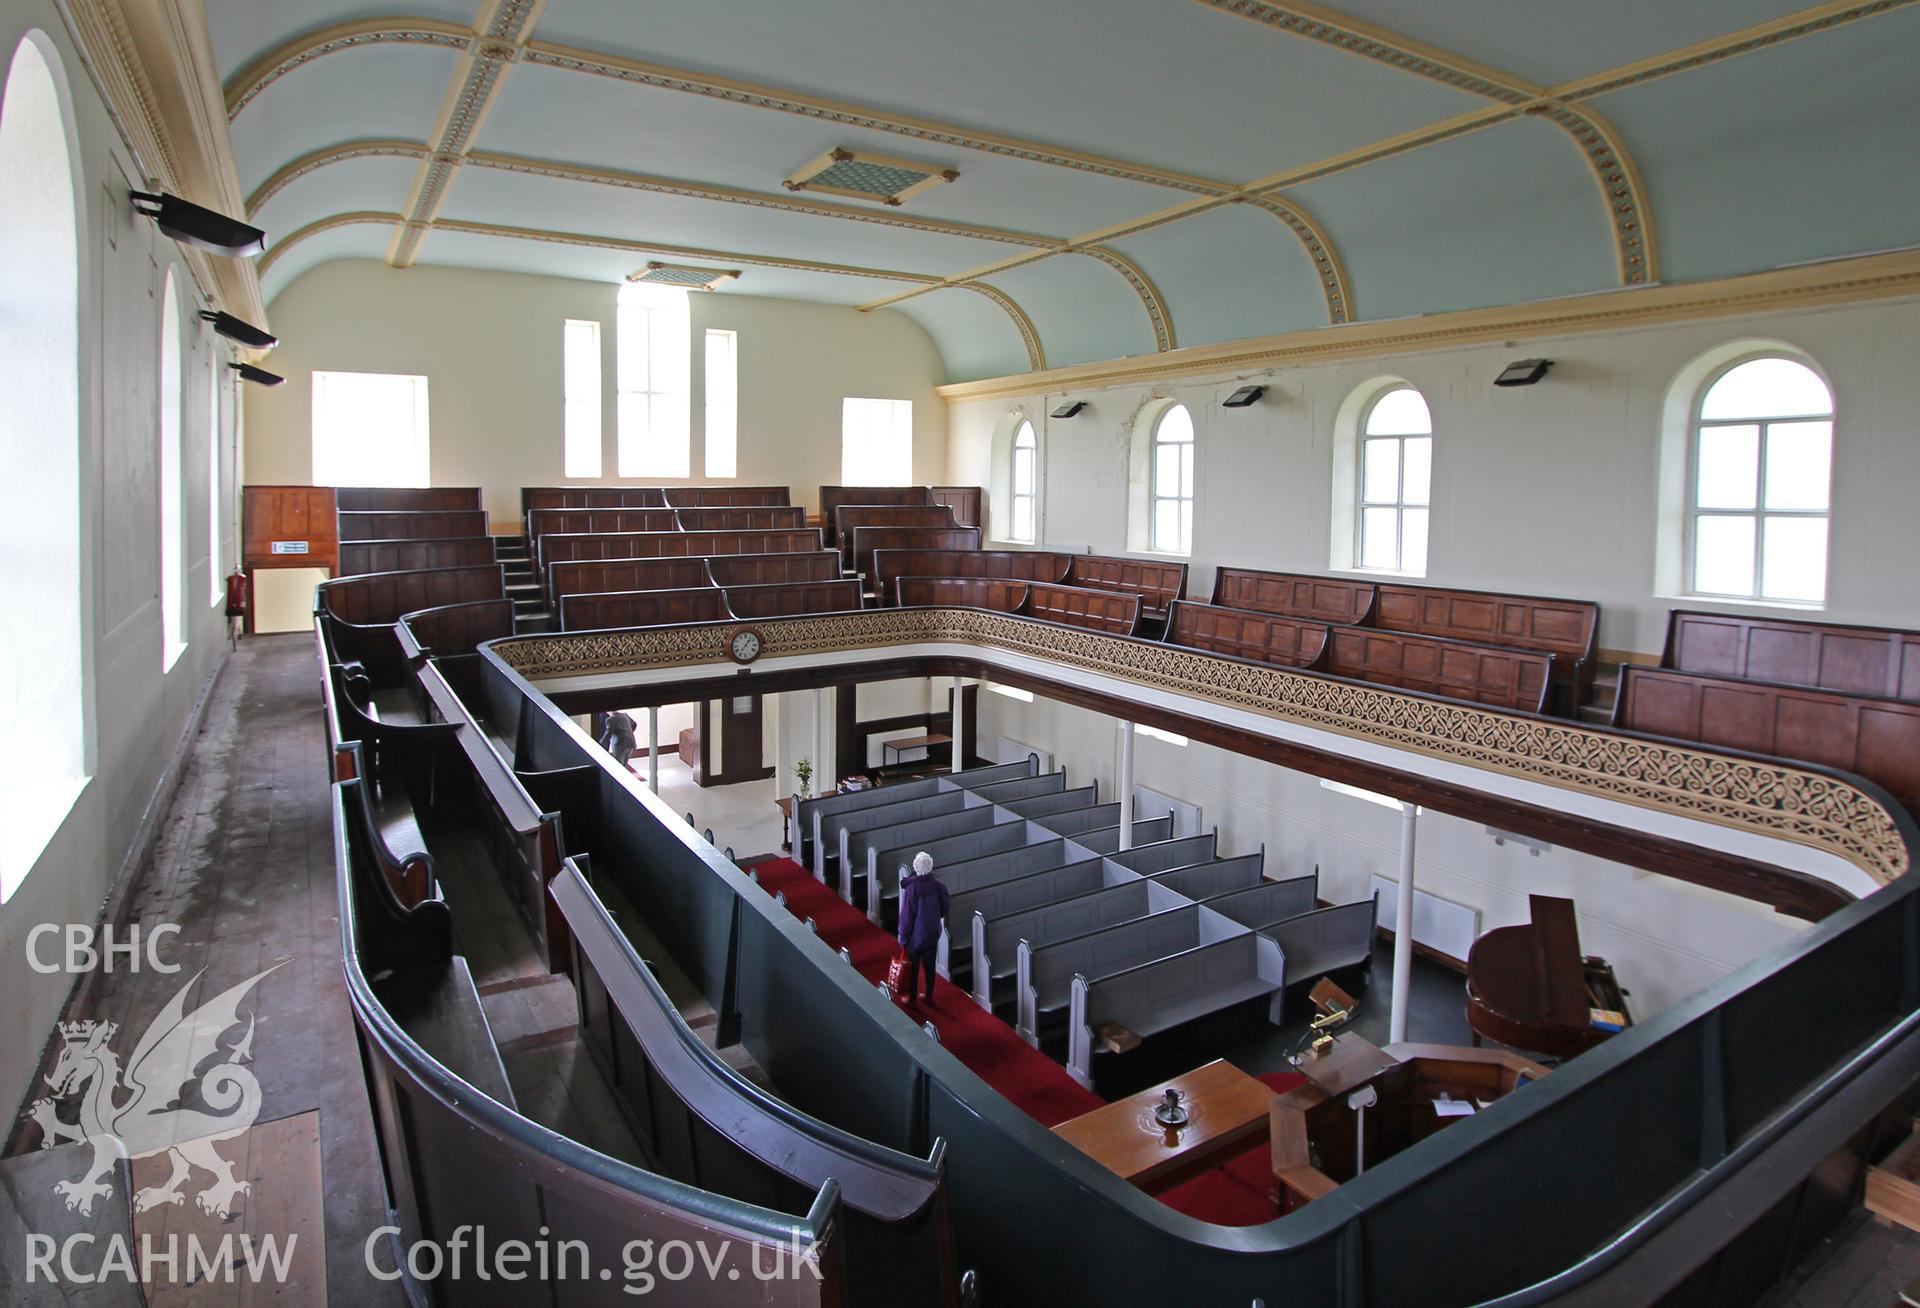 Colour photograph showing interior view looking from first floor balcony towards pews at Mynydd-Bach Independent Chapel, Treboeth, Swansea. Taken during photographic survey conducted by Sue Fielding on 13th May 2017.